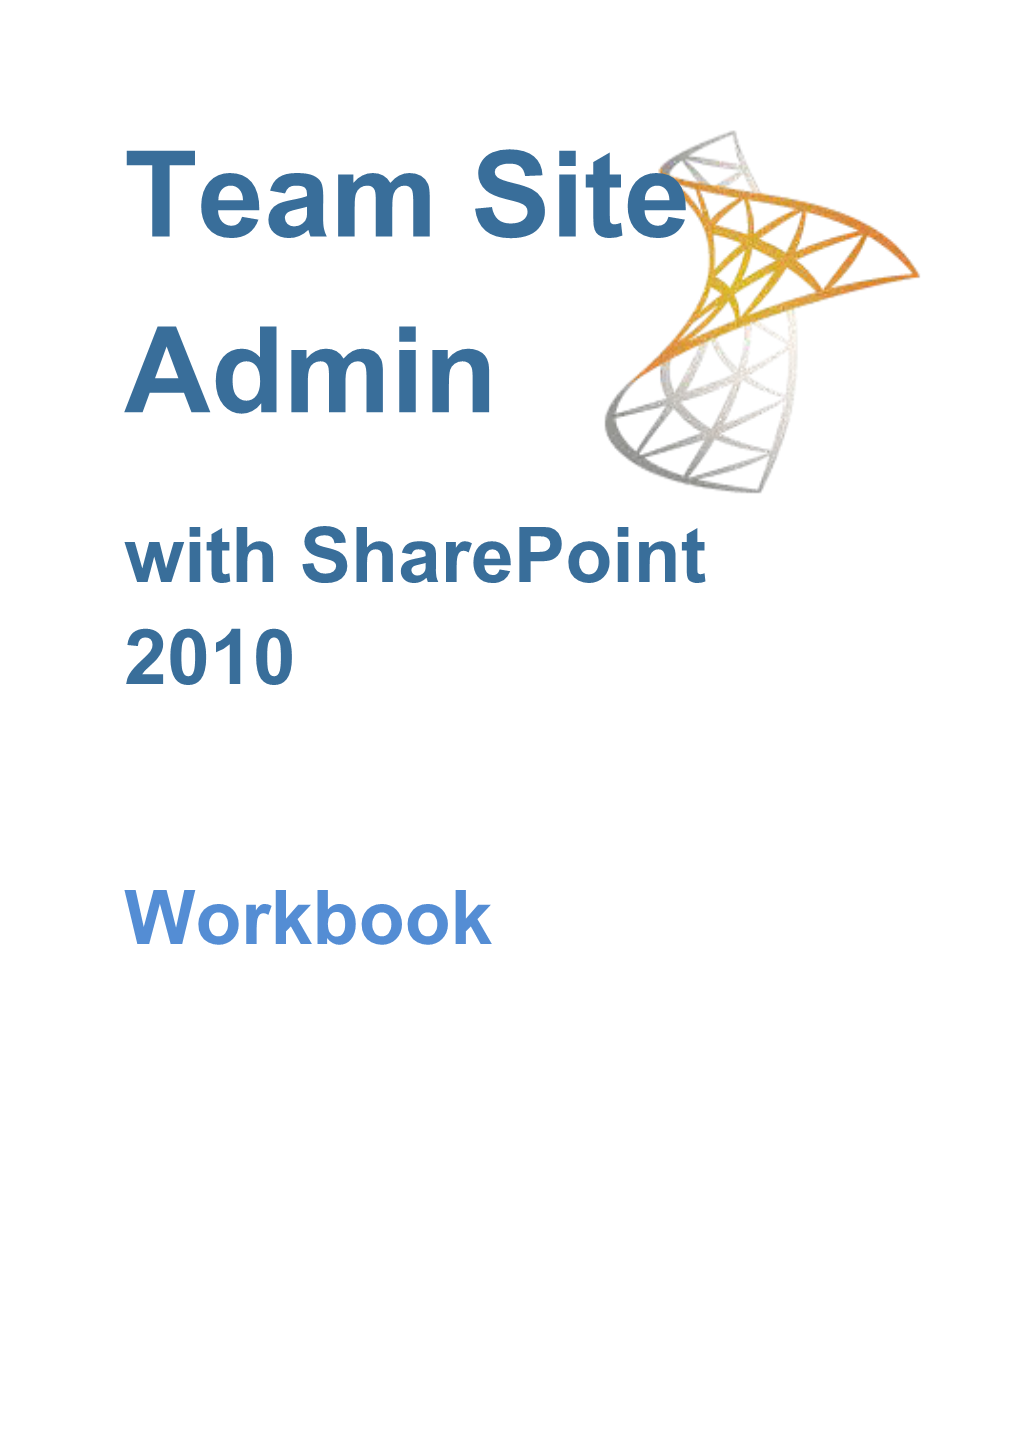 With Sharepoint 2010